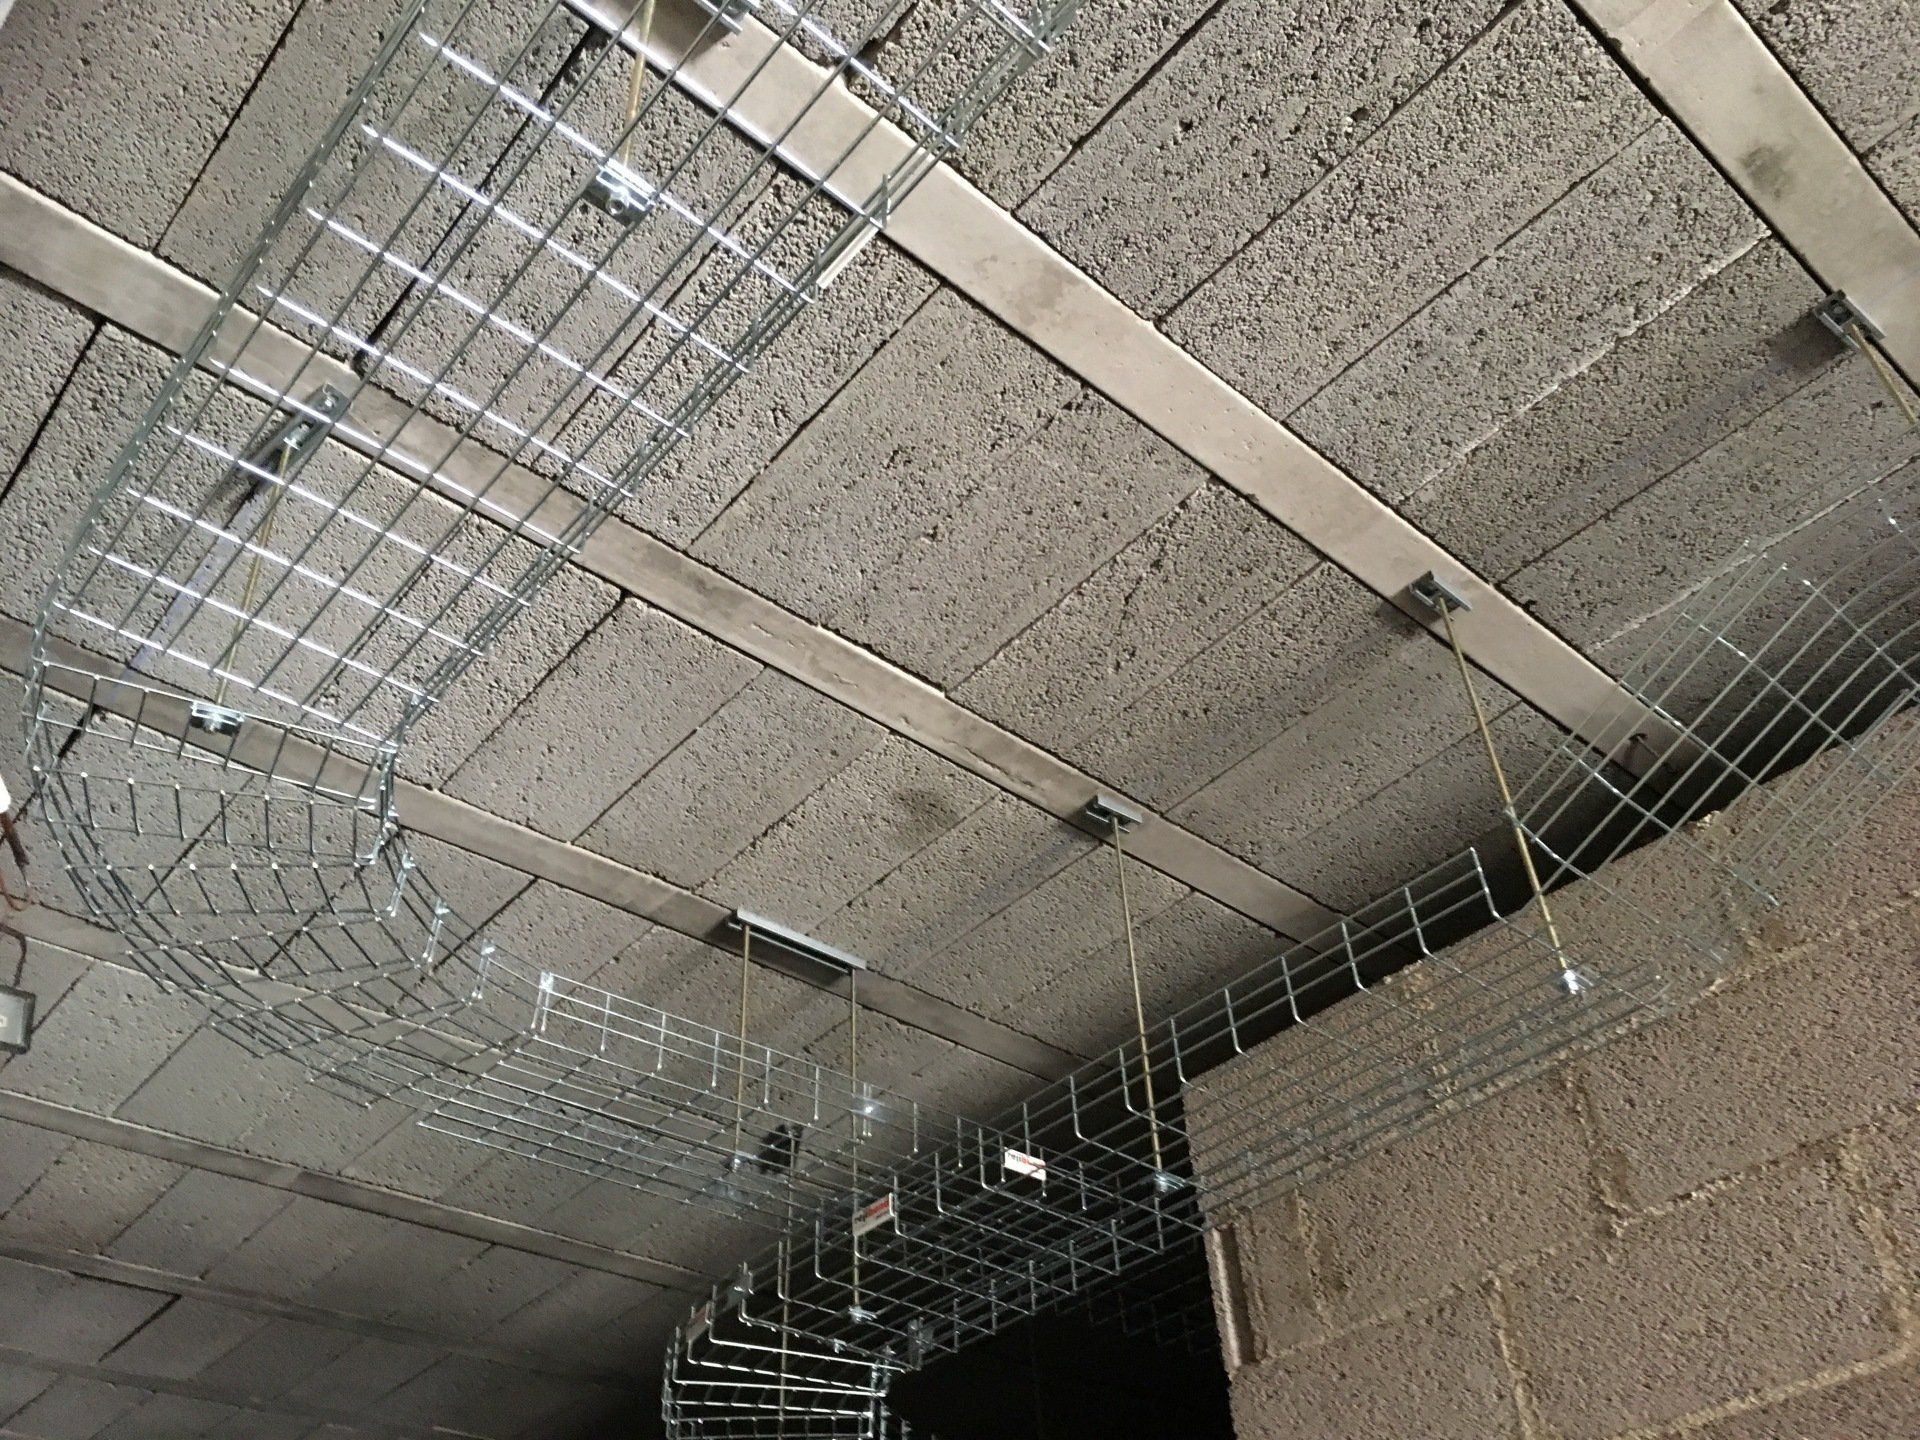 Photograph of basket tray on ceiling